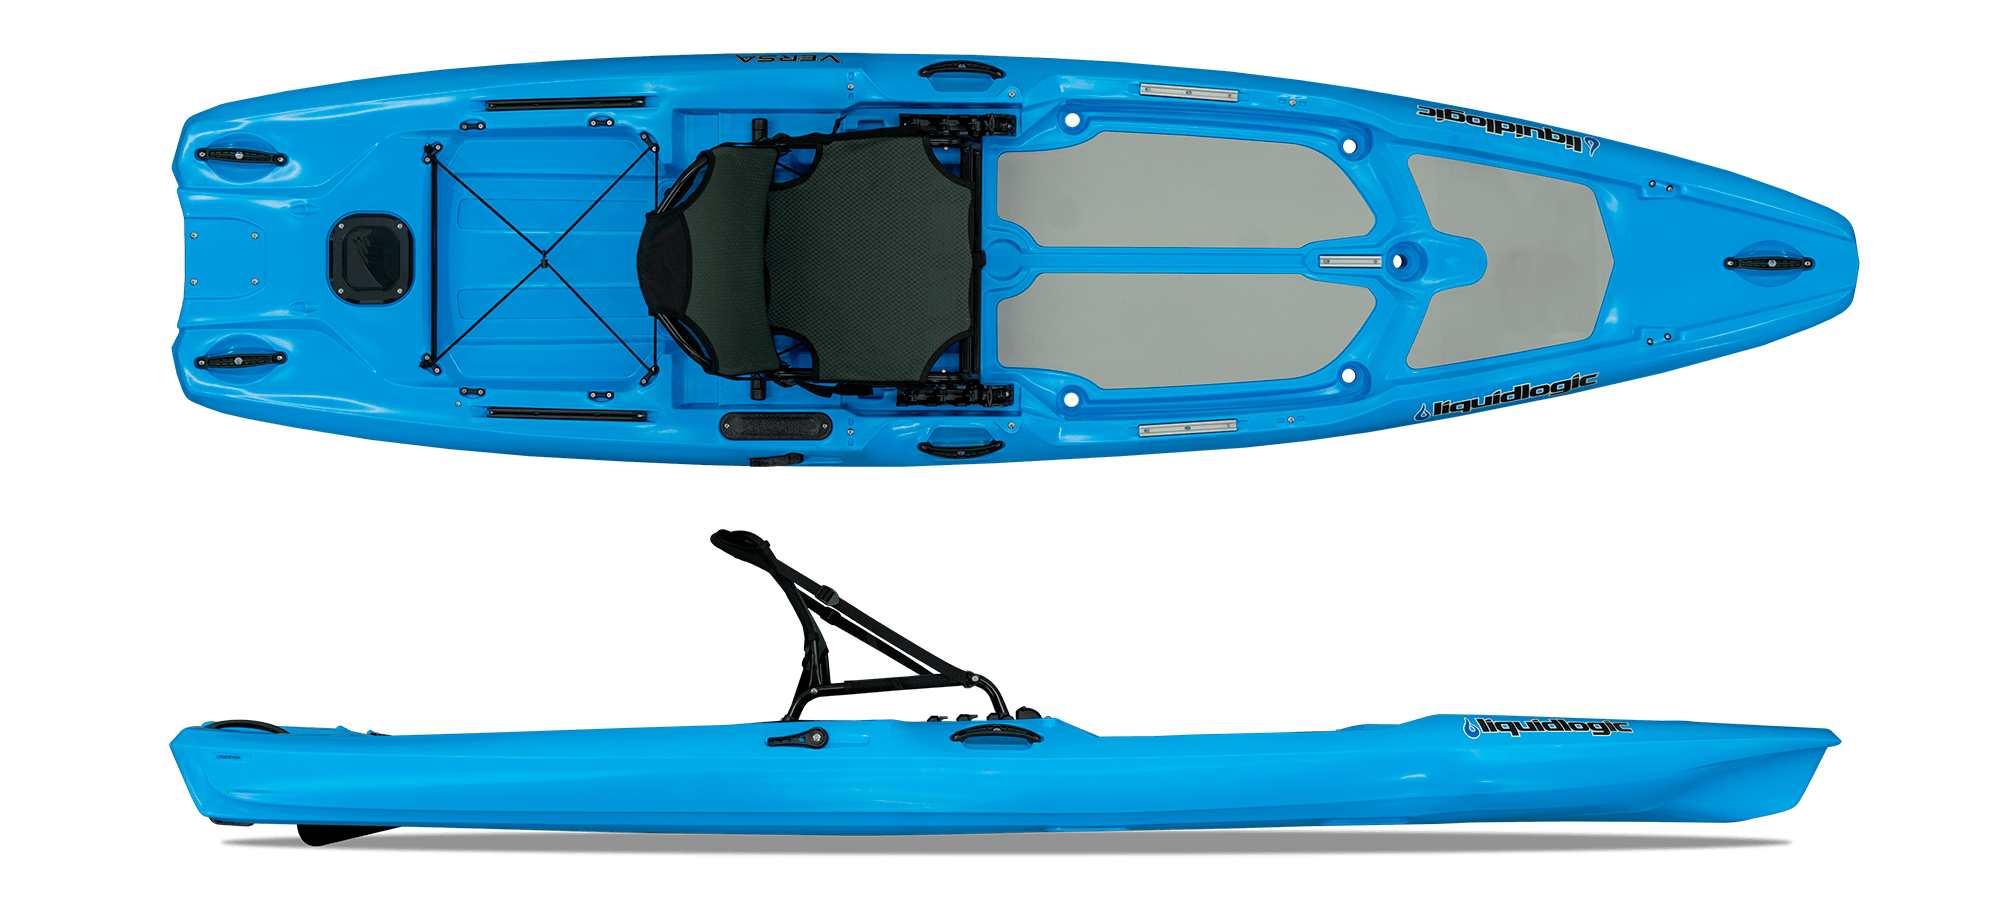 Exciting sit on top kayak For Thrill And Adventure 